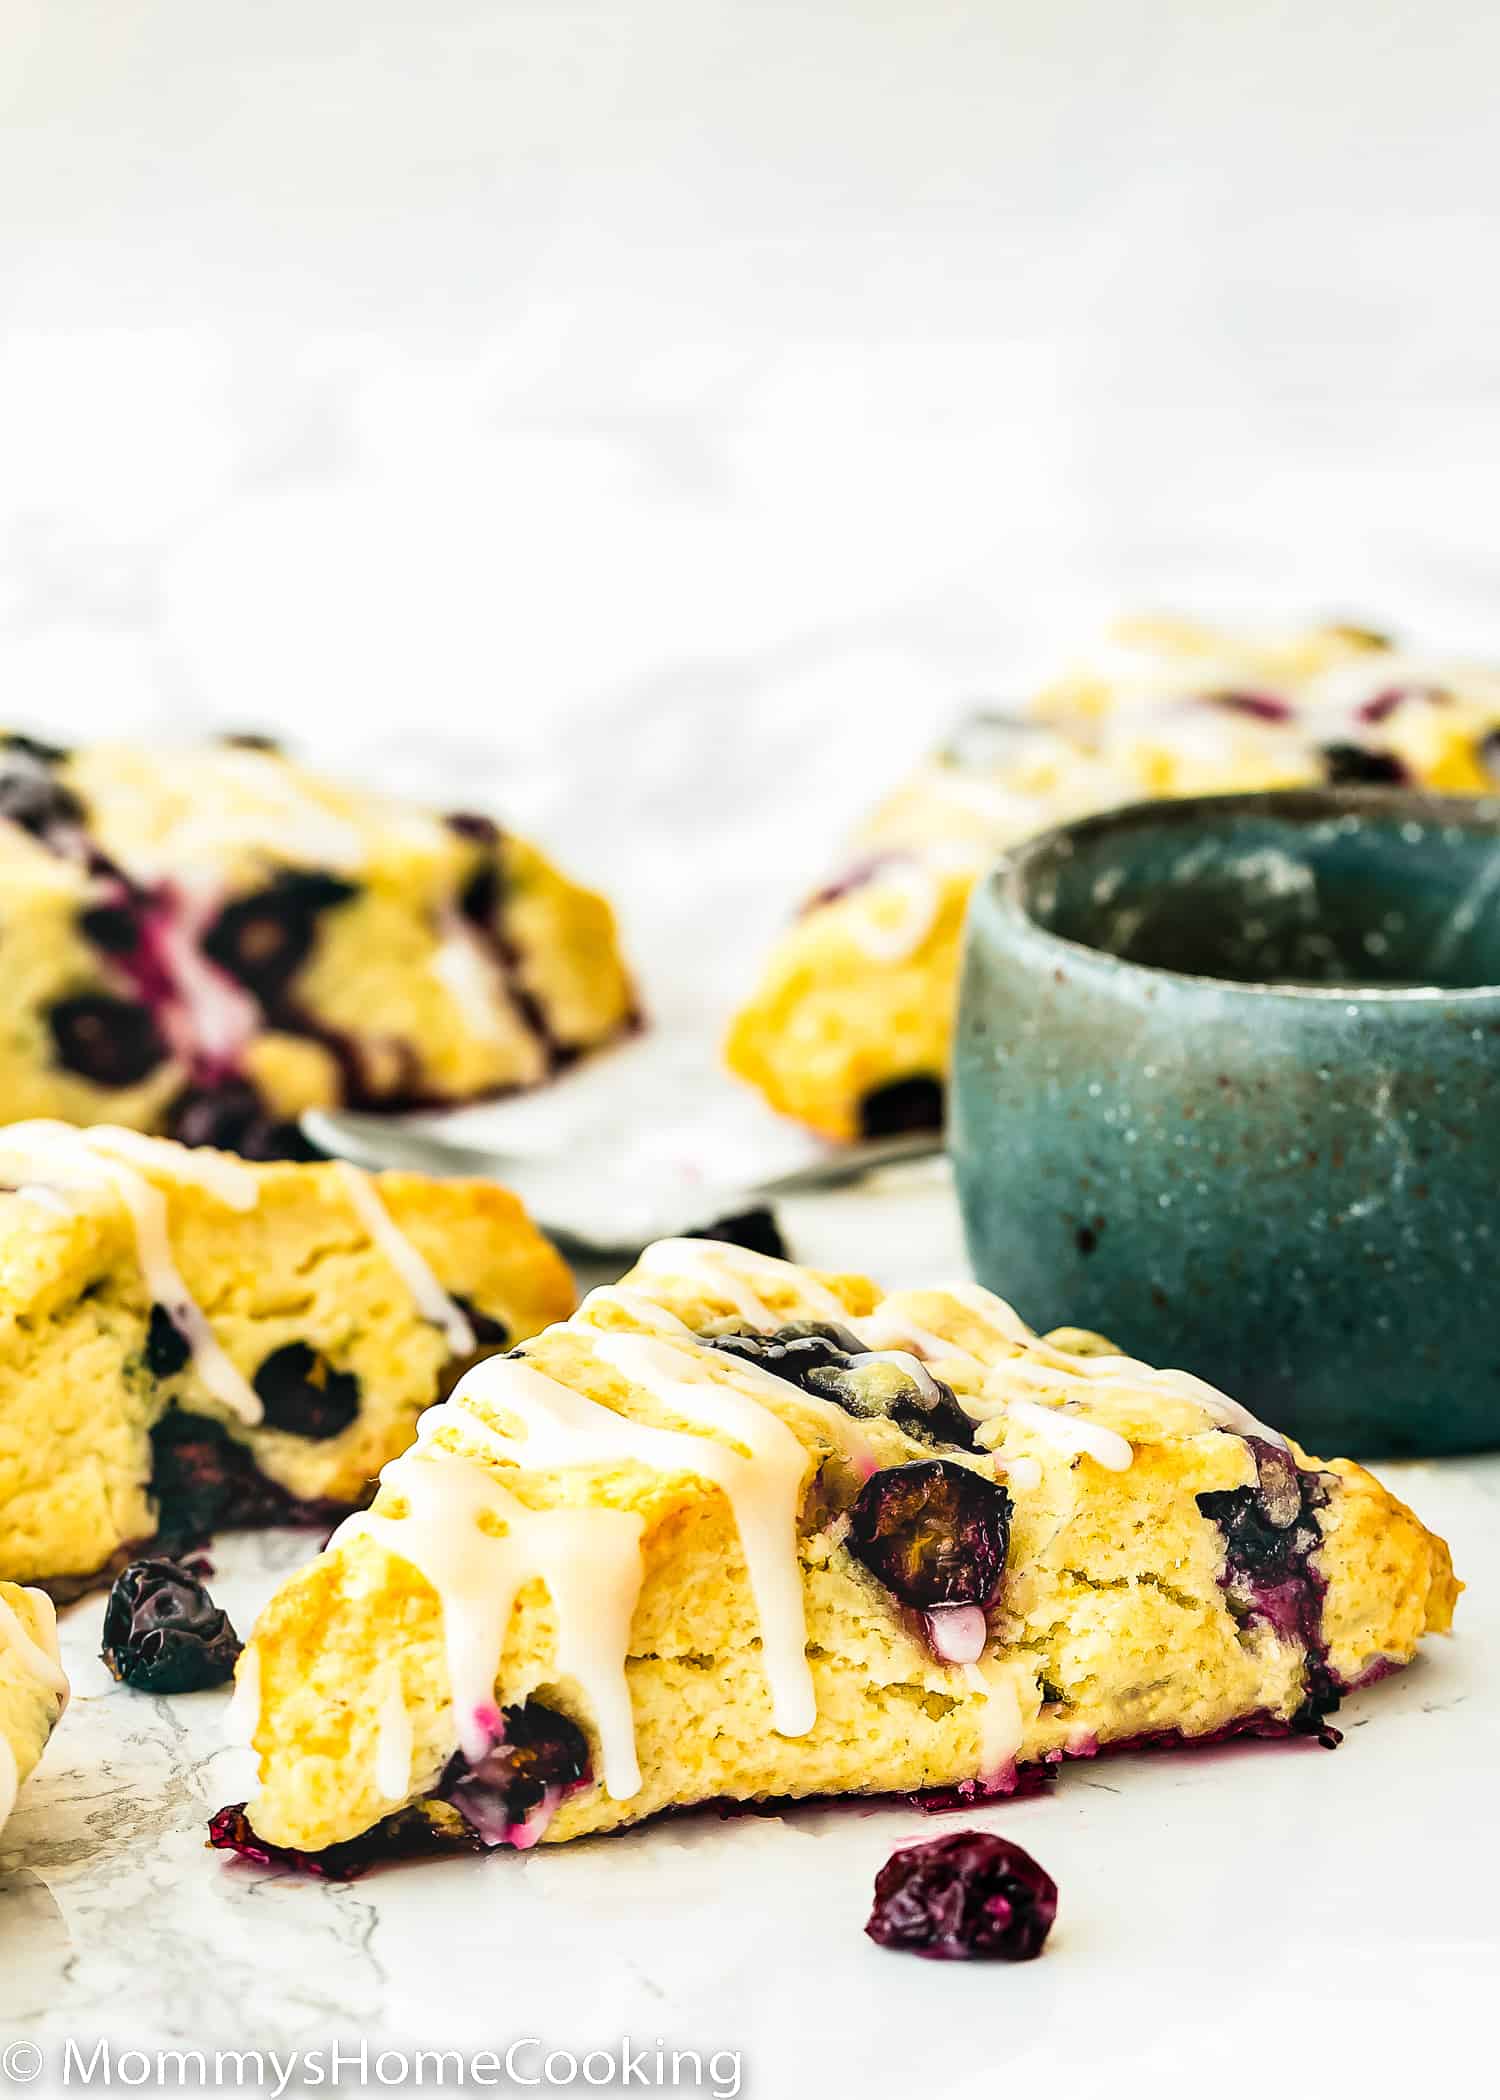 Eggless Blueberry Scones drizzled with lemon glaze over a marble surface.